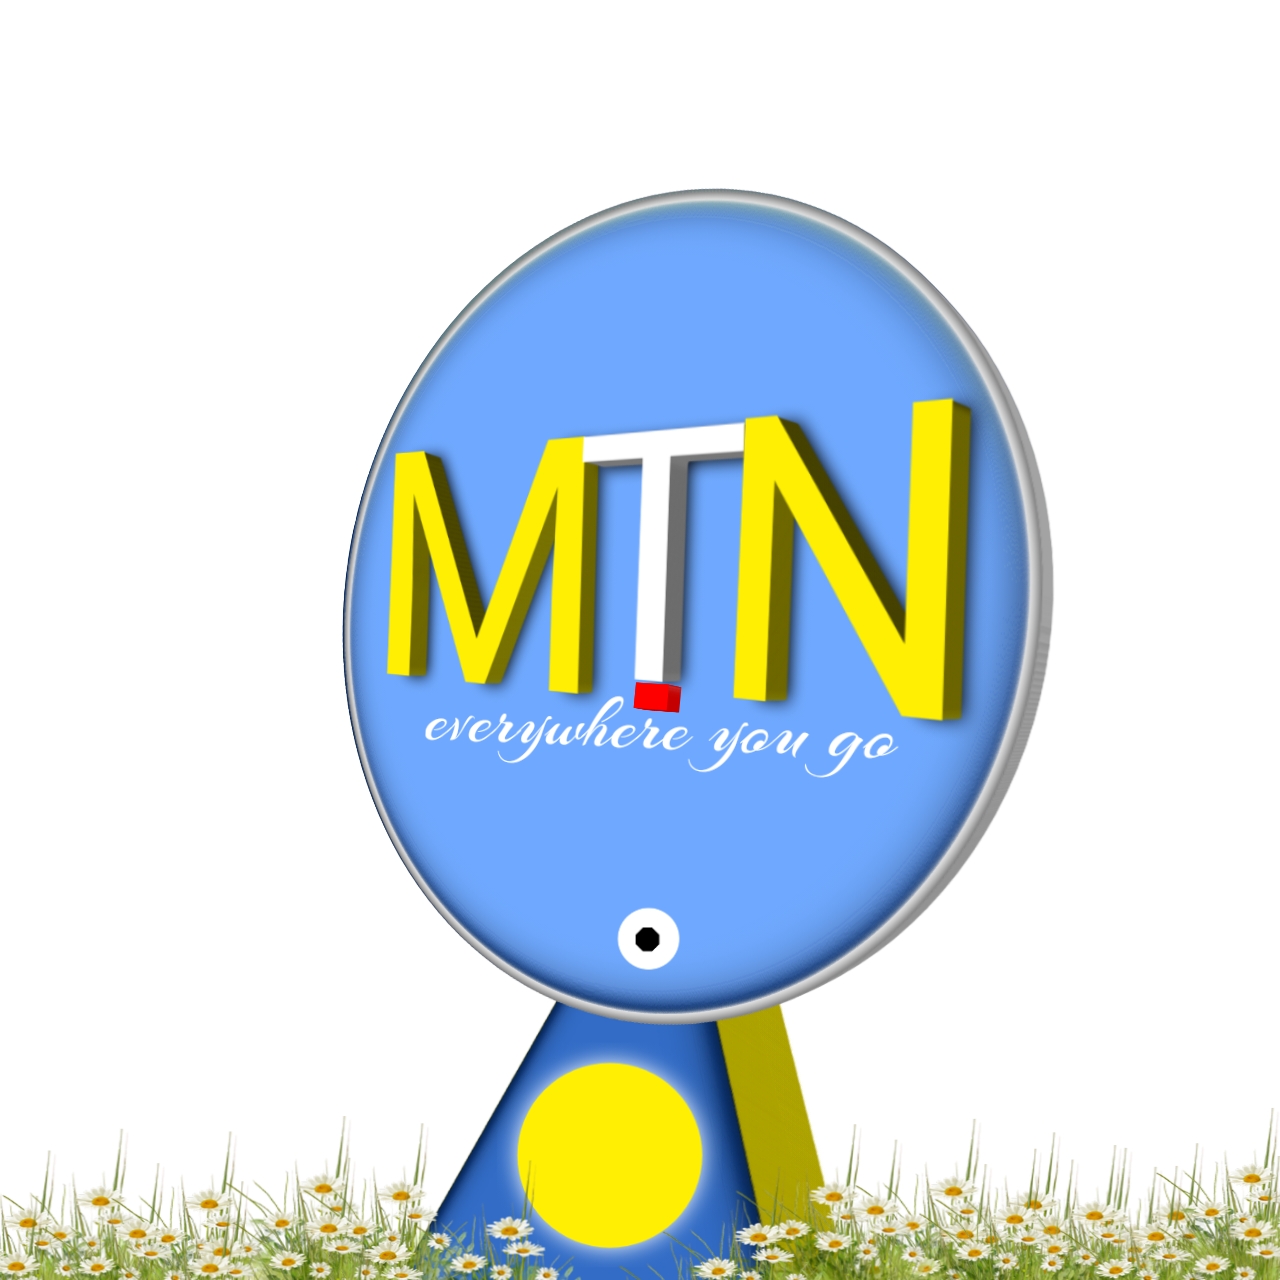 https://www.reladex.com.ng/2022/07/how-to-check-mtn-number-in-nigeria.html